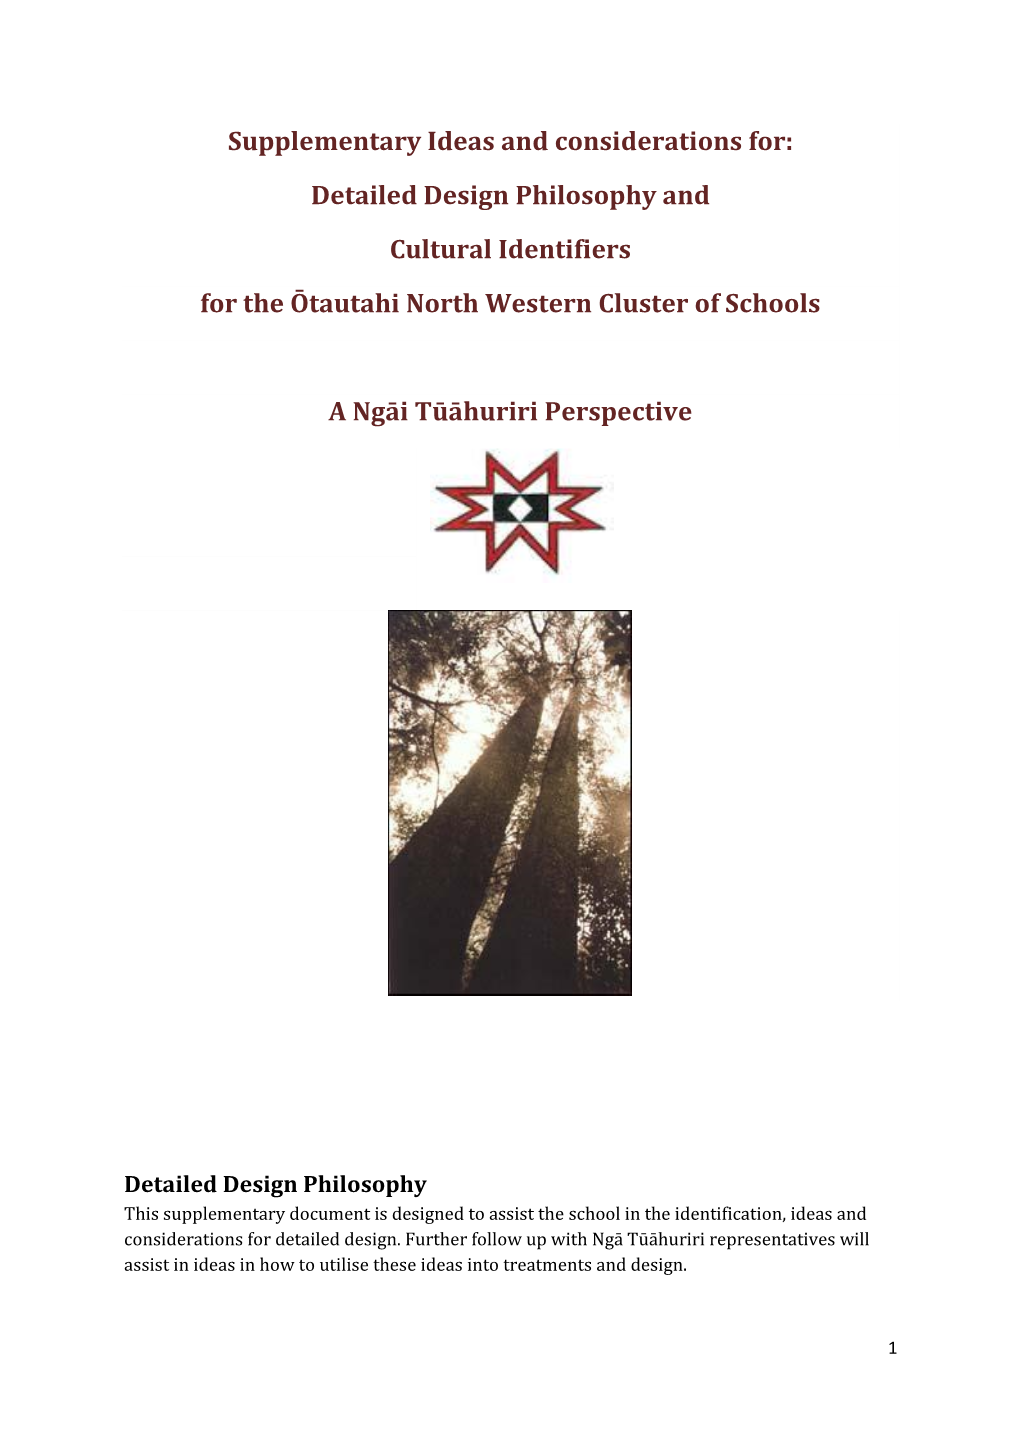 Detailed Design Philosophy and Cultural Identifiers for the Ōtautahi North Western Cluster of Schools